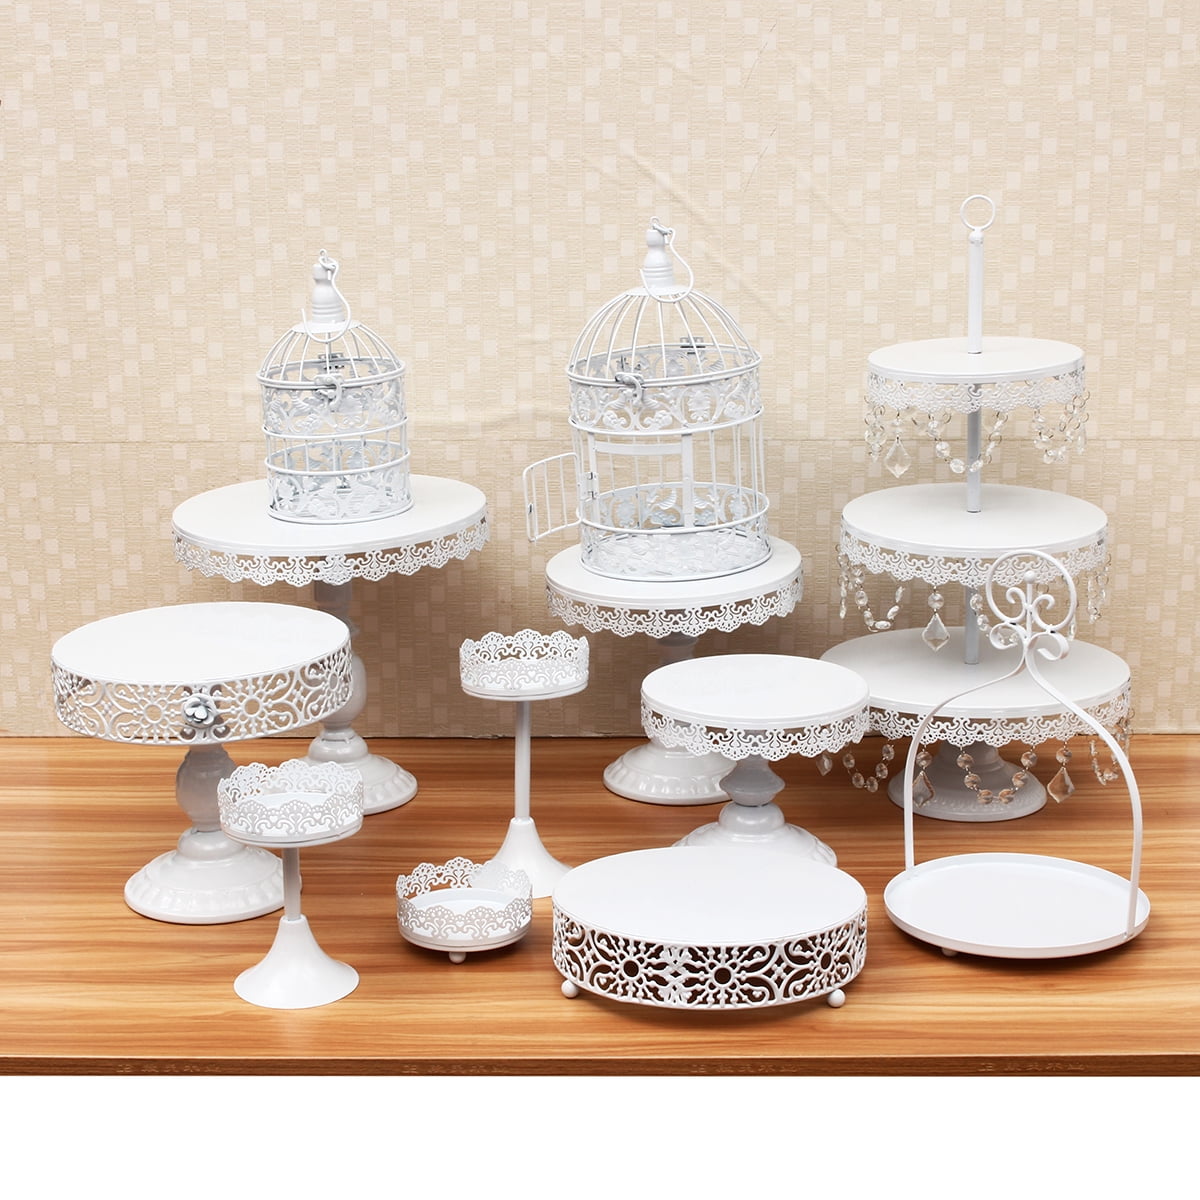 NEW BAKERY CRAFTS 5 TIERED DISPOSAL CAKE STAND SUS-50 